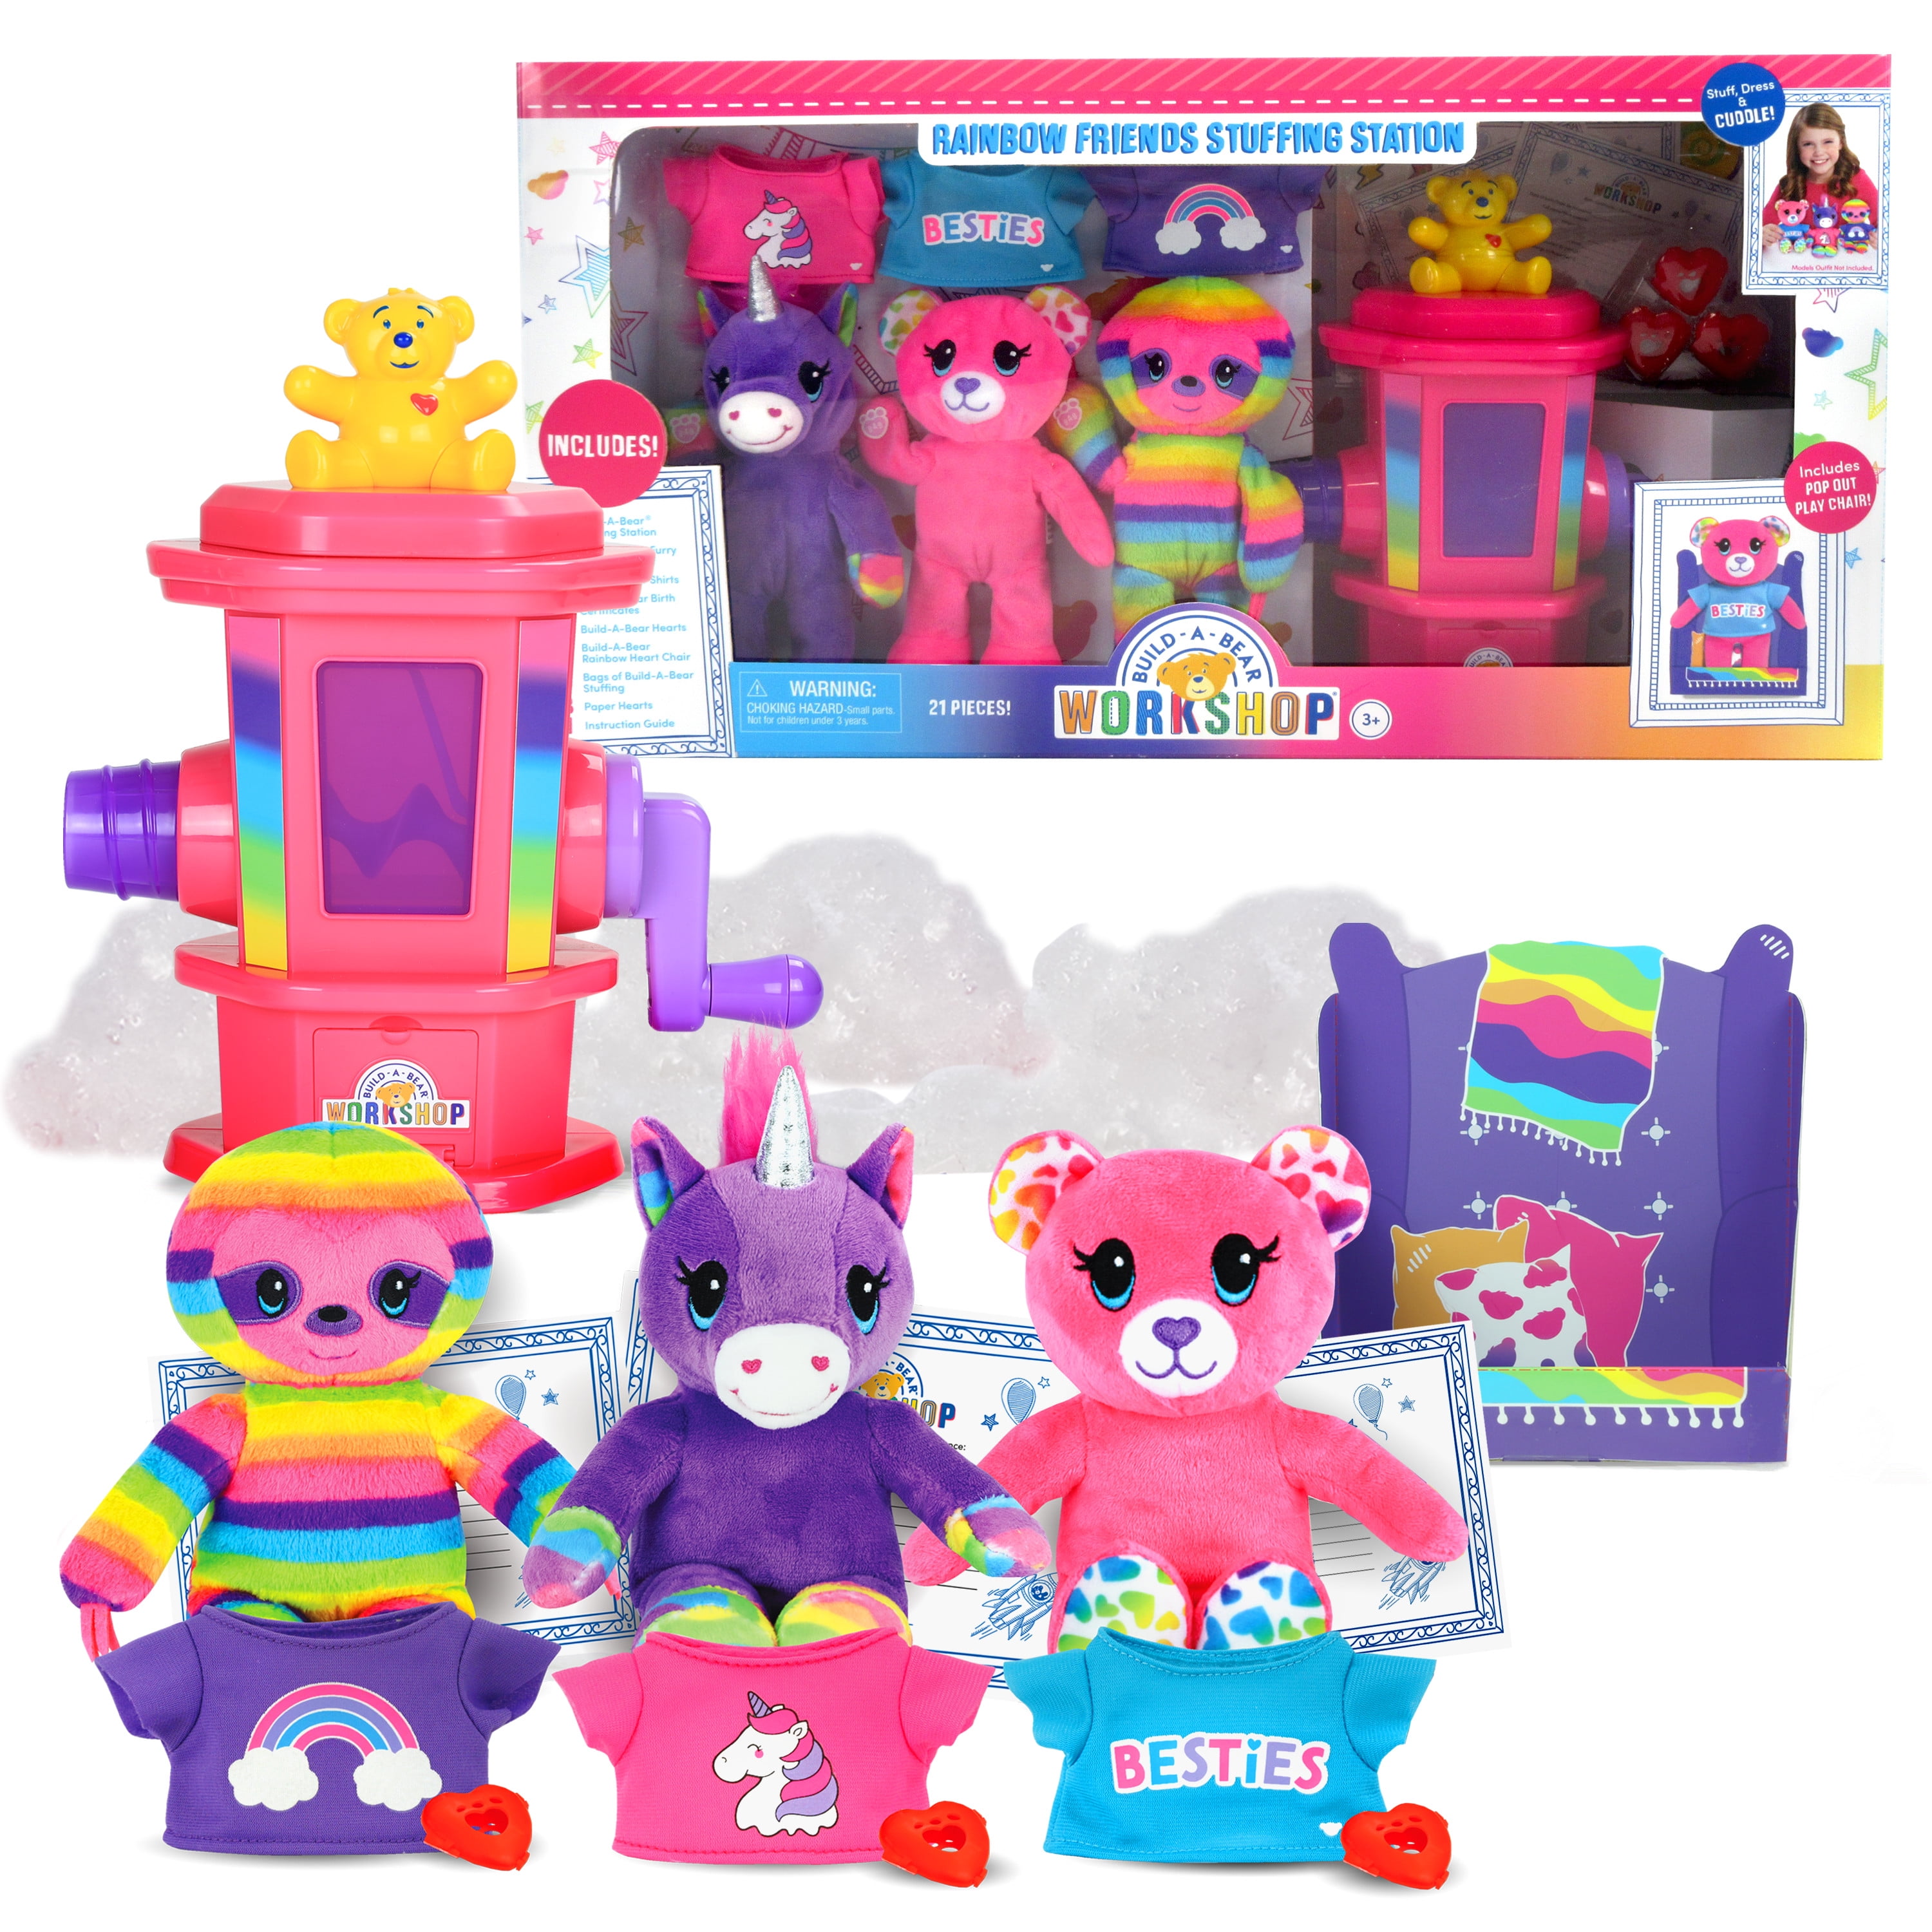 Build-A-Bear Workshop Rainbow Friends Stuffing Station, 21 Pieces, Accessories, Ages 3 Up, by Just Play